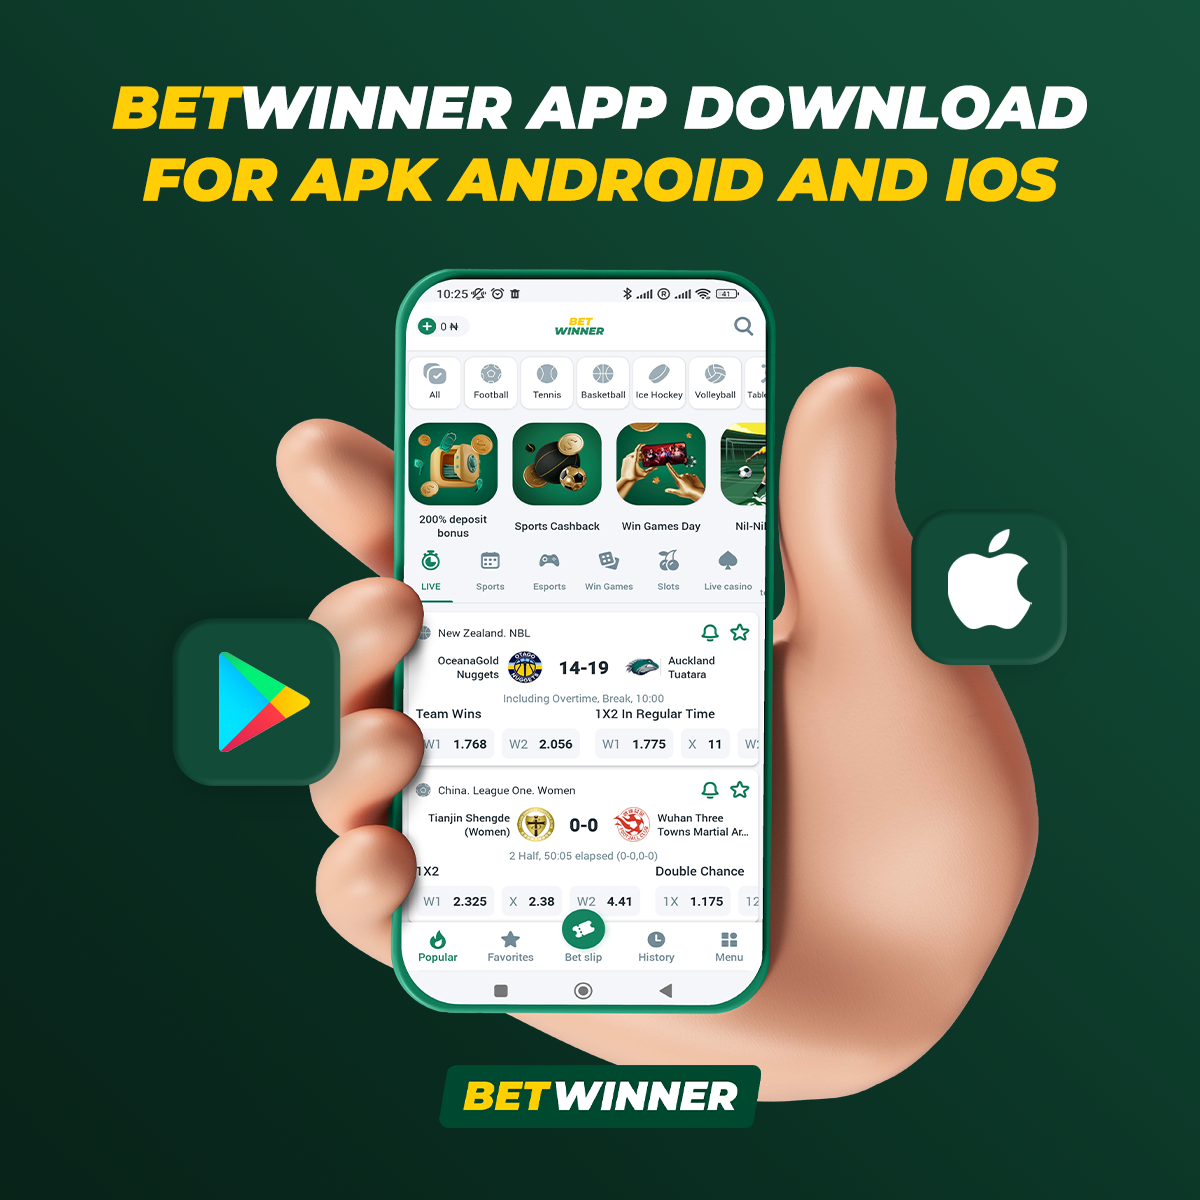 3 Kinds Of Betwinner login: Which One Will Make The Most Money?